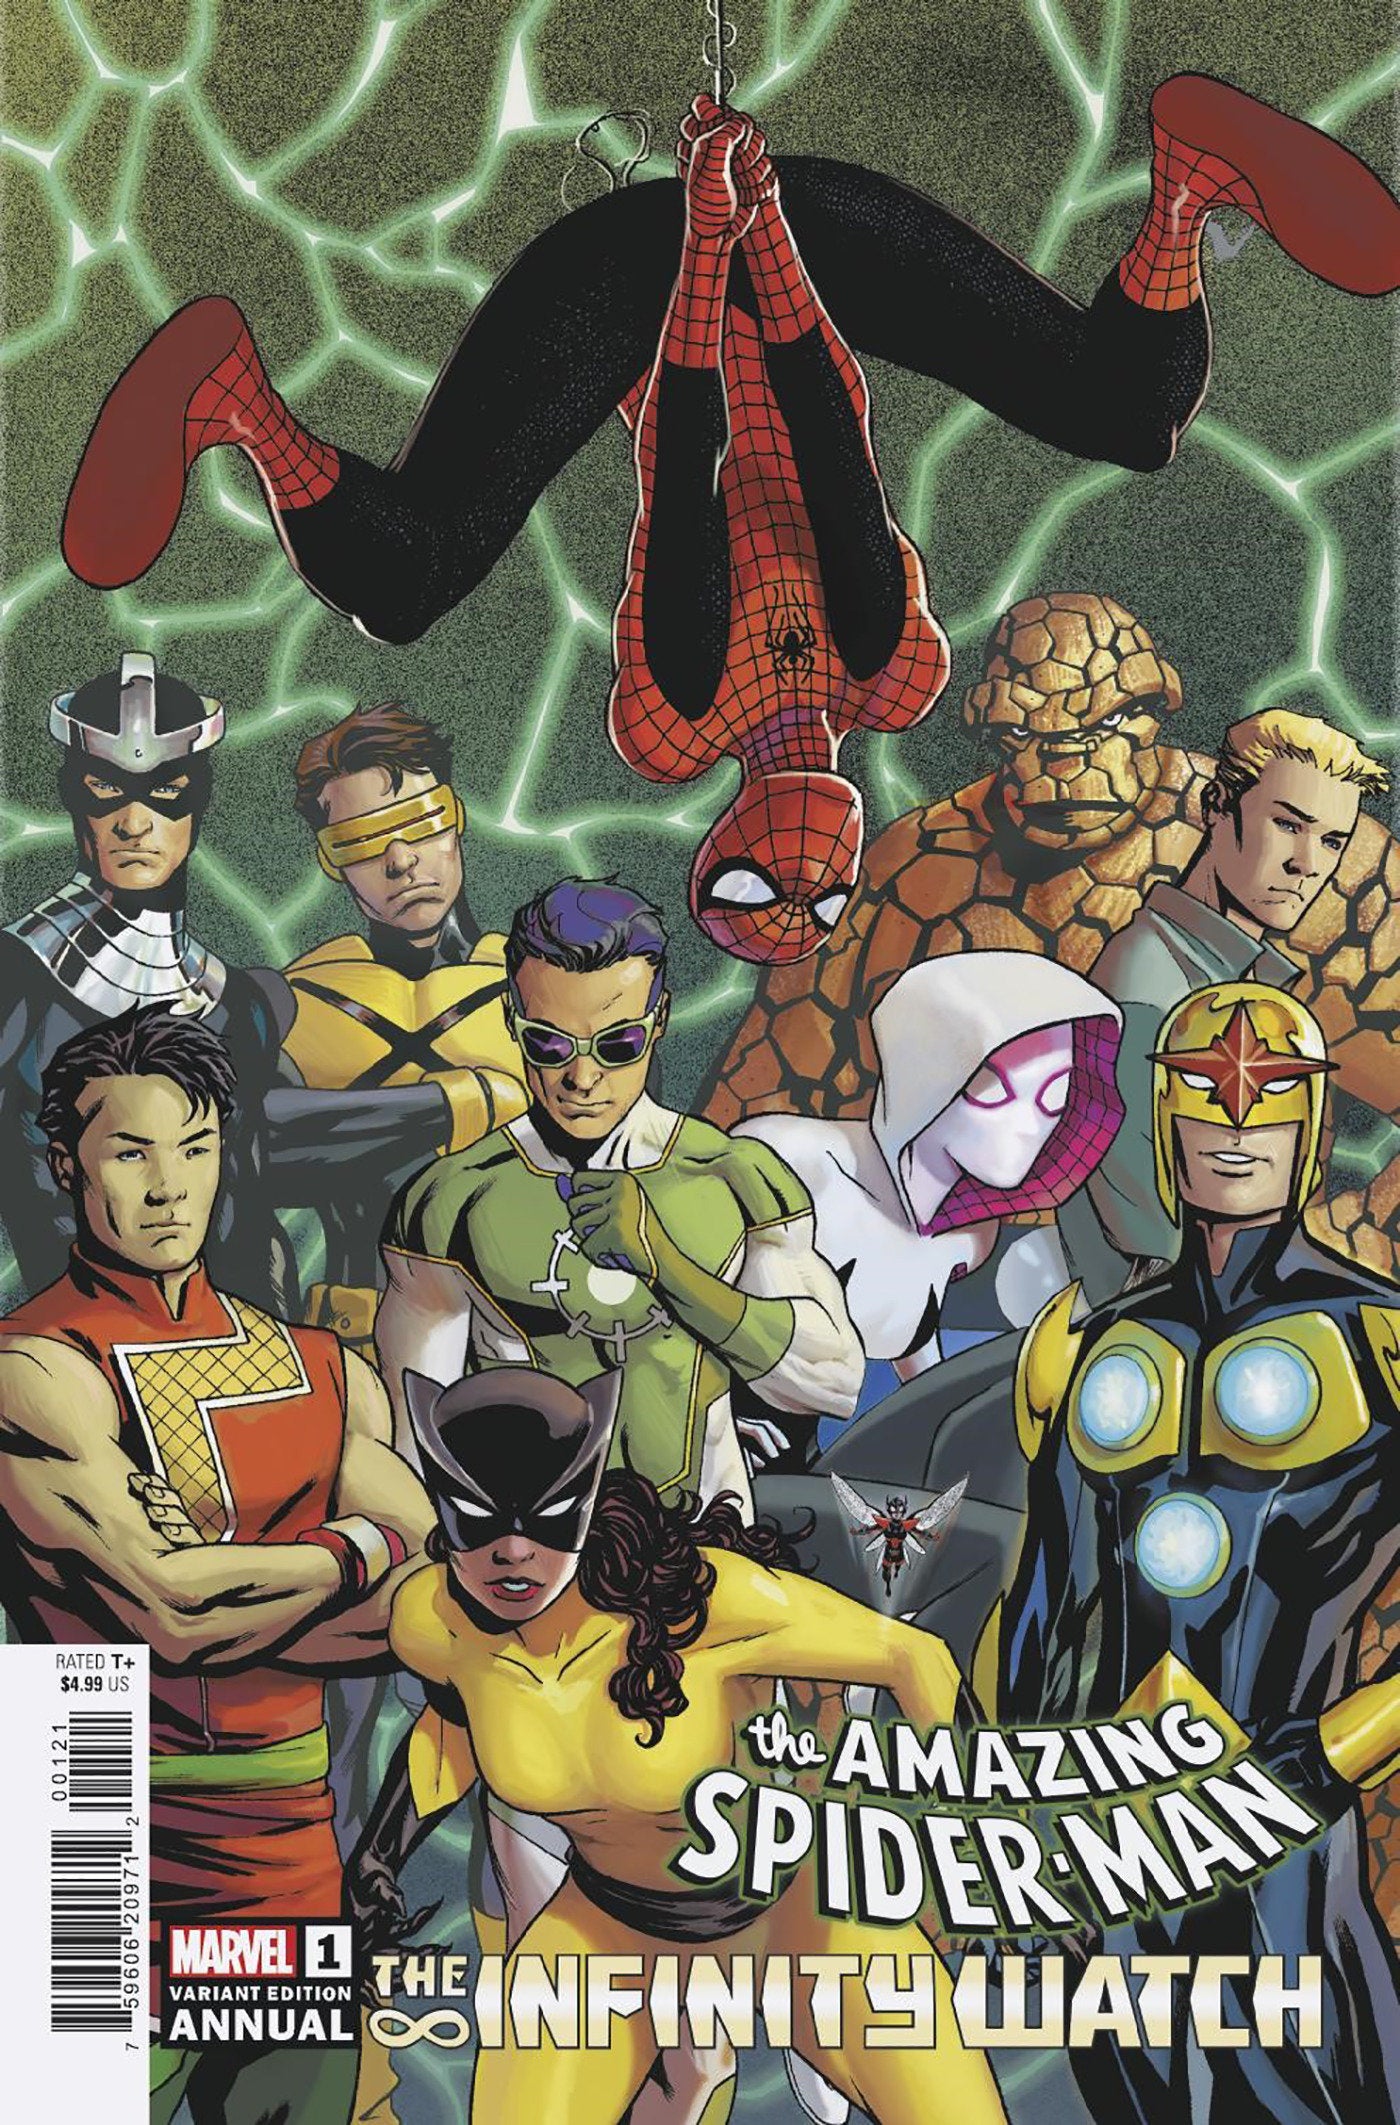 Amazing Spider-Man Annual #1 Mike McKone Infinity Watch Variant [Iw]